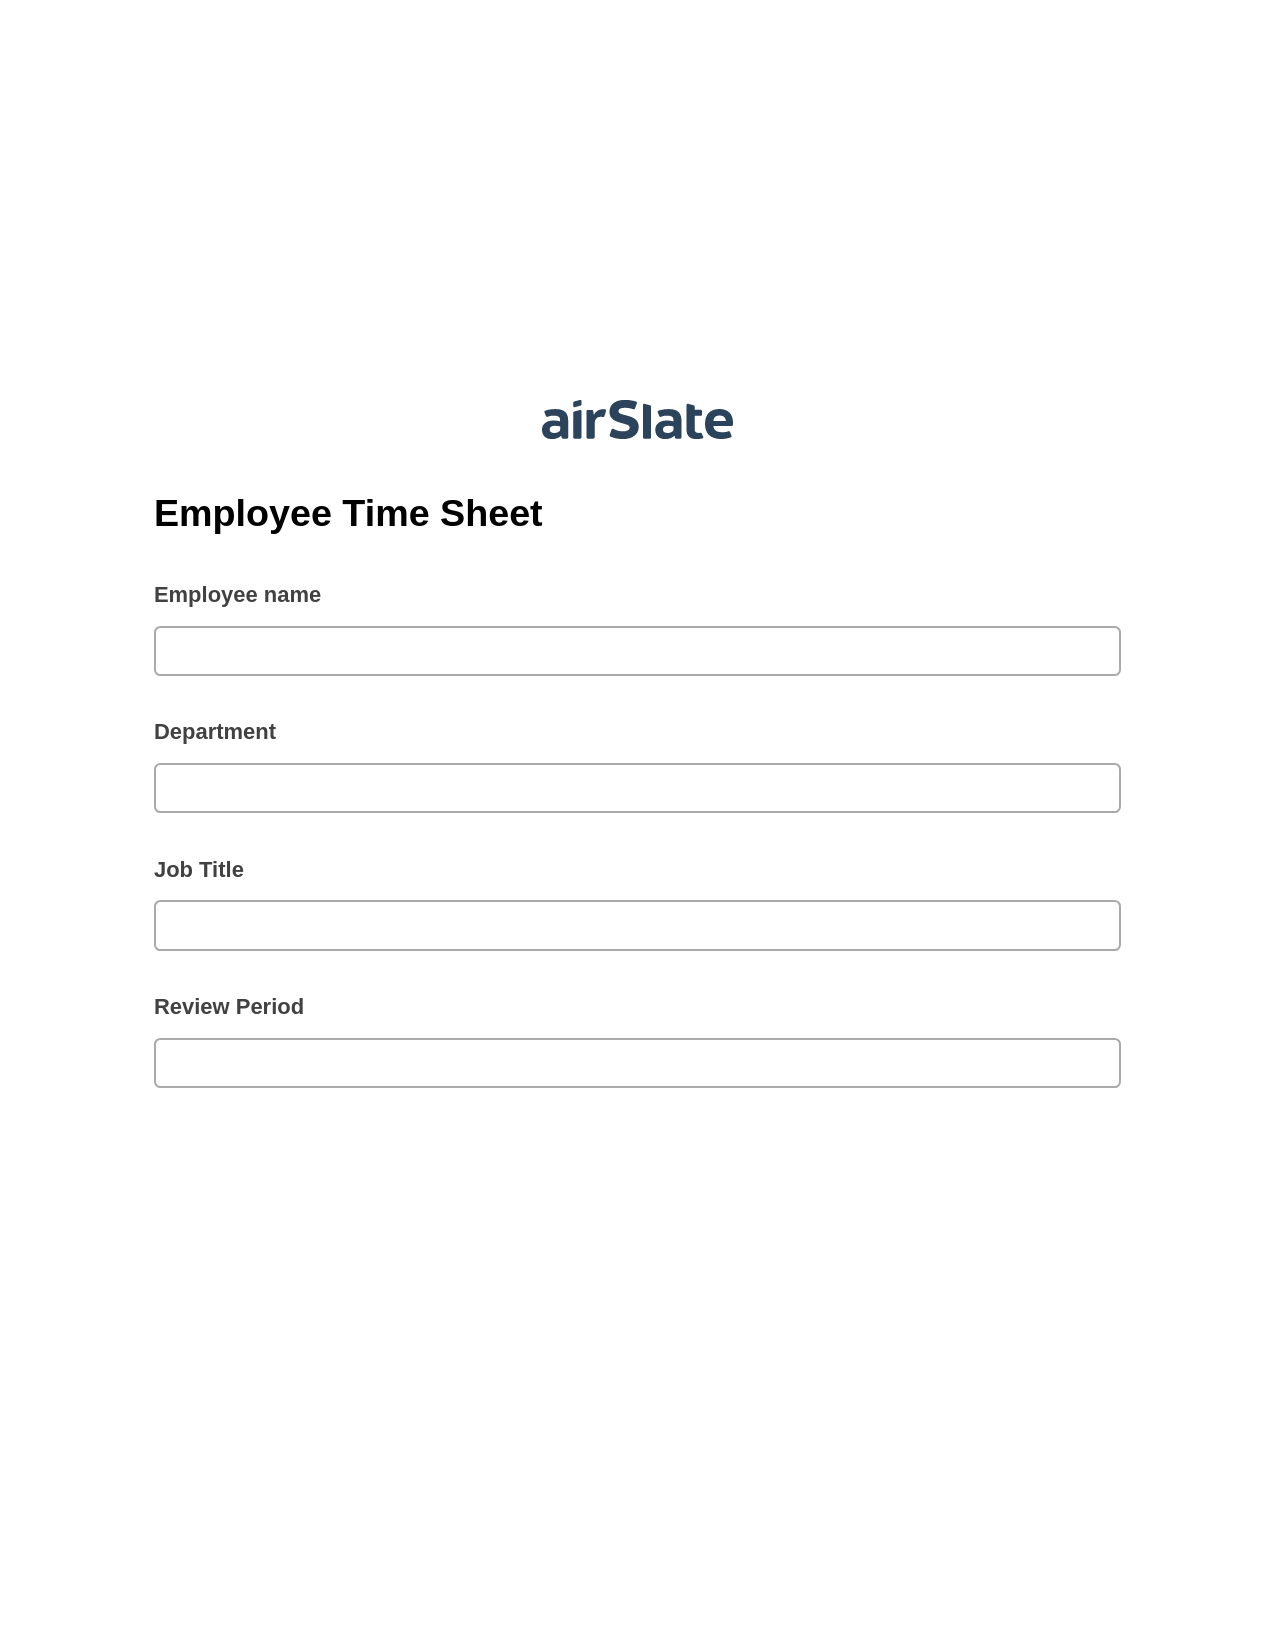 Employee Time Sheet Pre-fill from Google Sheets Bot, Update Audit Trail Bot, Archive to Google Drive Bot